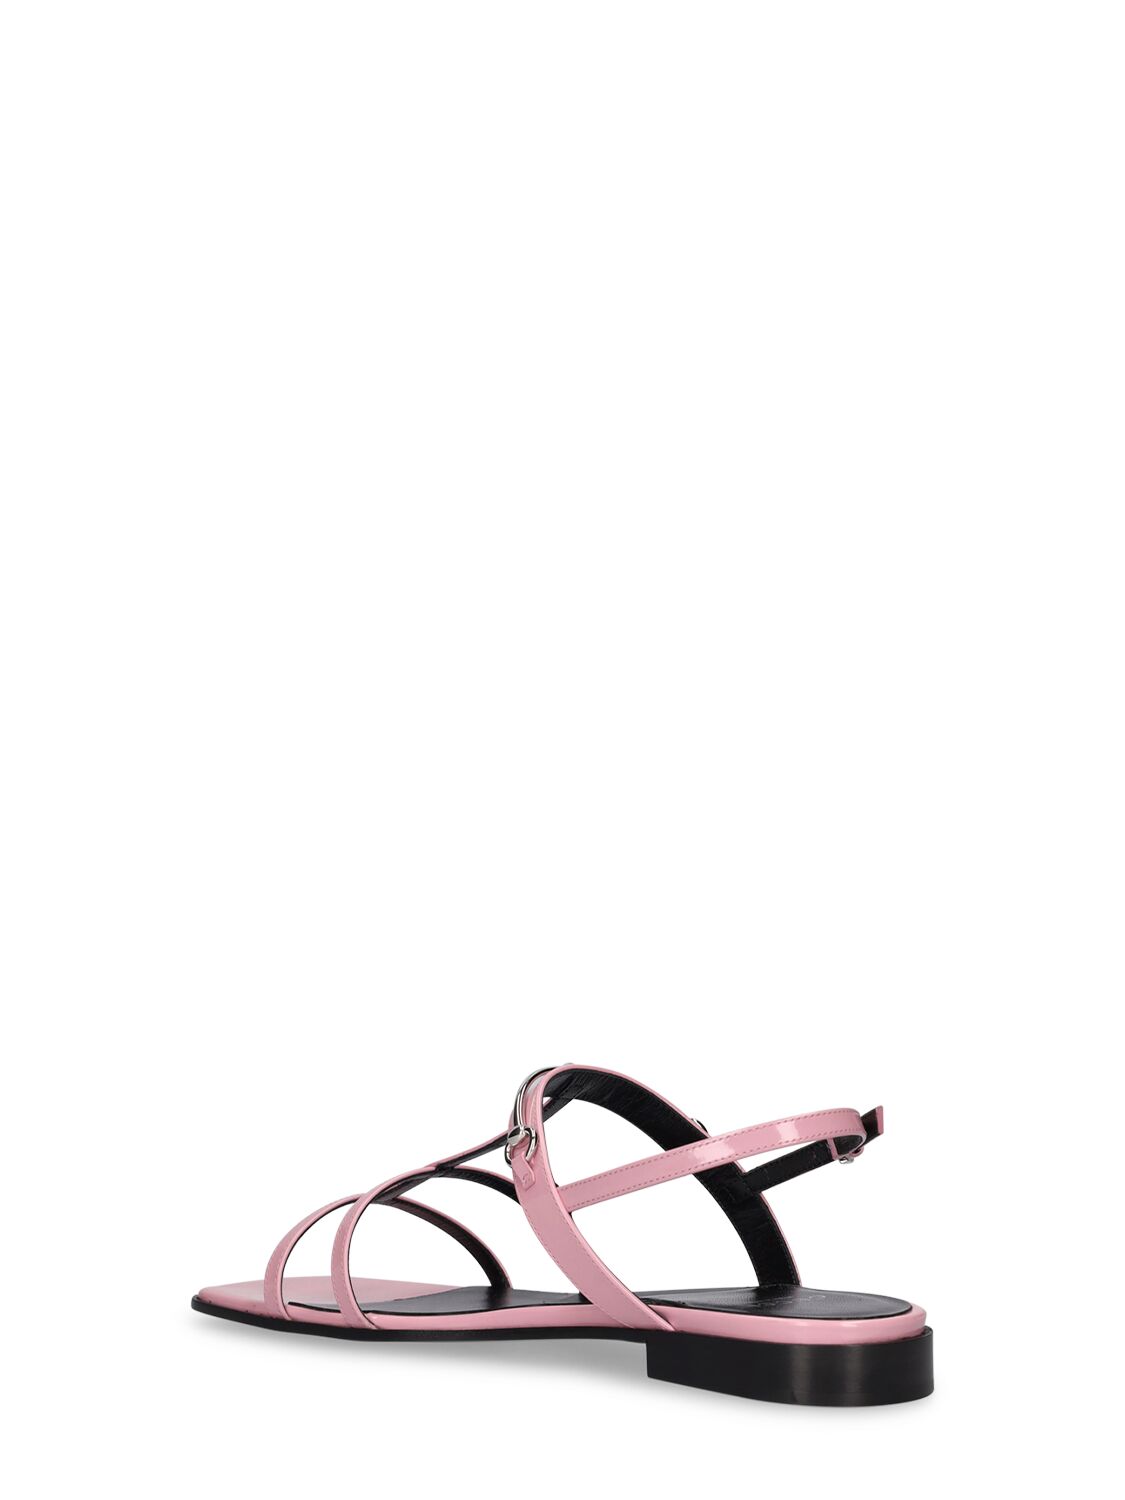 Shop Gucci 15mm Slim Horsebit Leather Flat Sandals In Dolly Pink